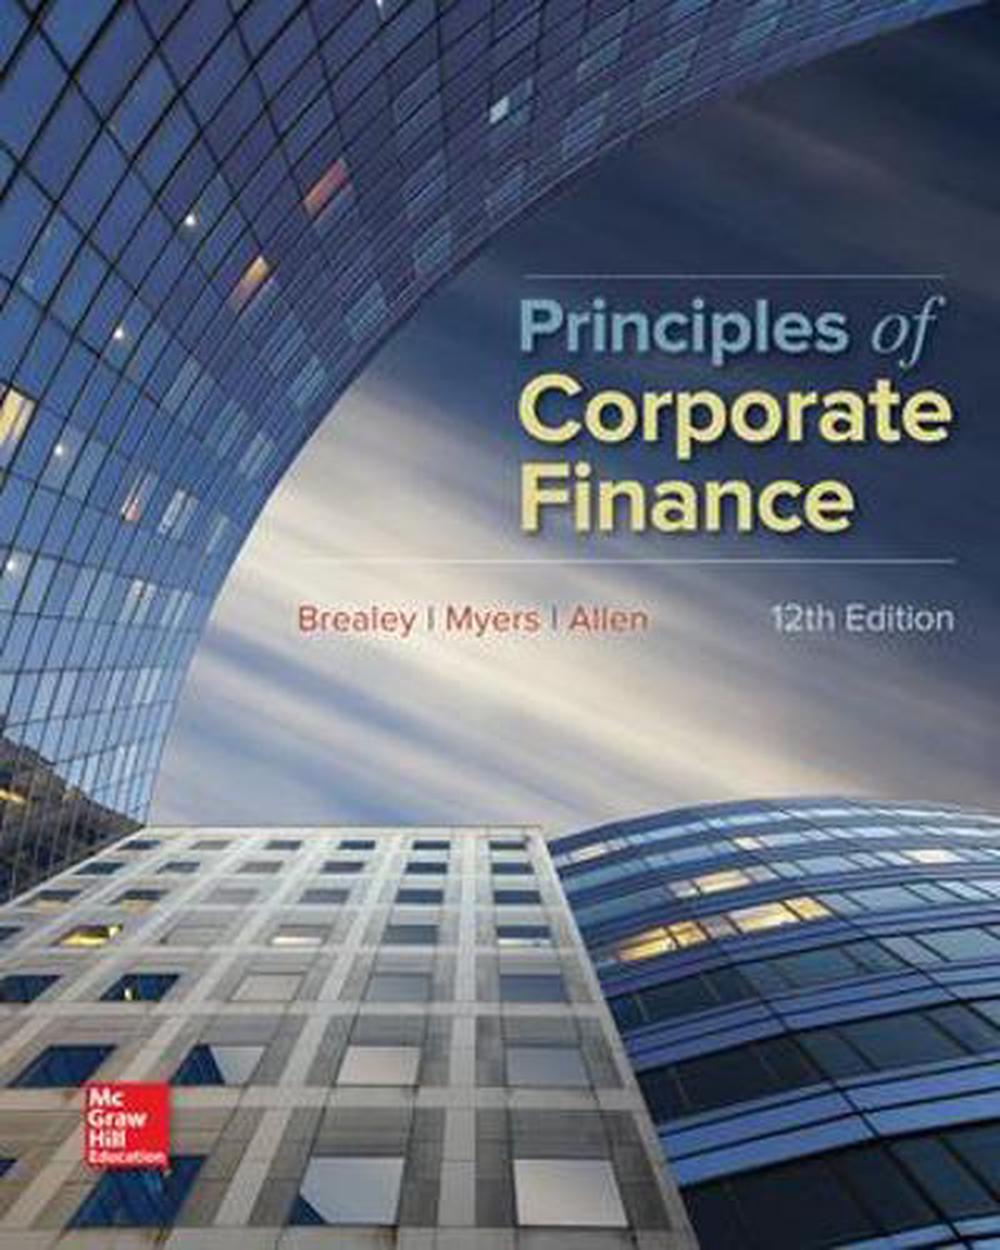 Principles of Corporate Finance, 12th Edition by Richard A. Brealey